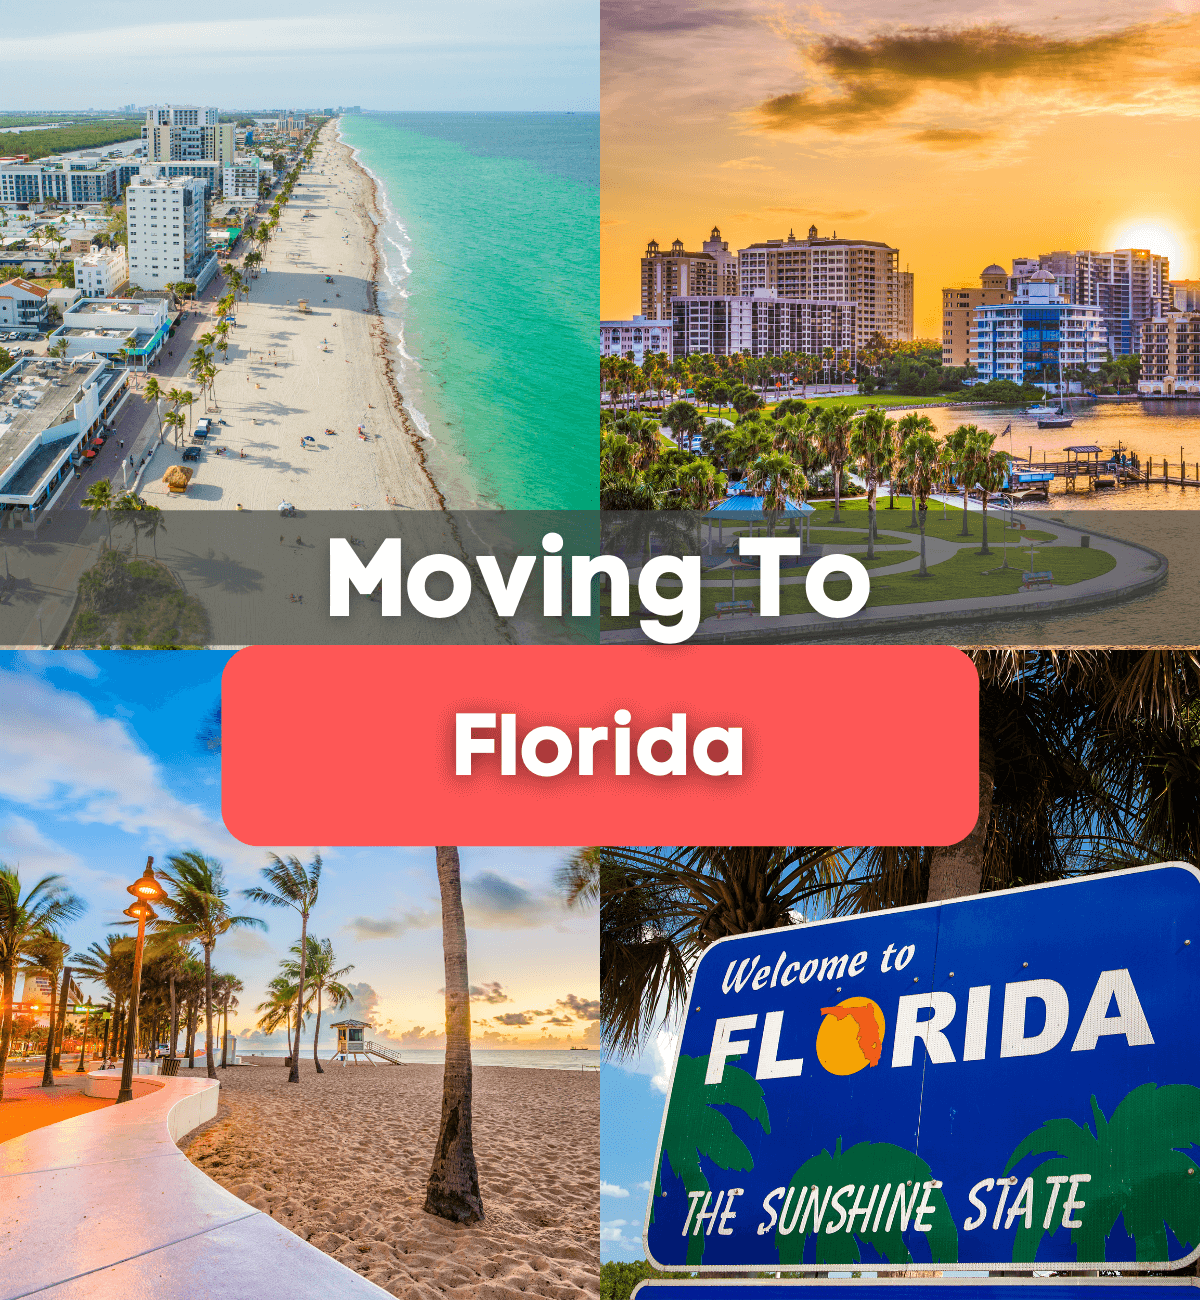 Moving to Florida - What is it like living in Florida?